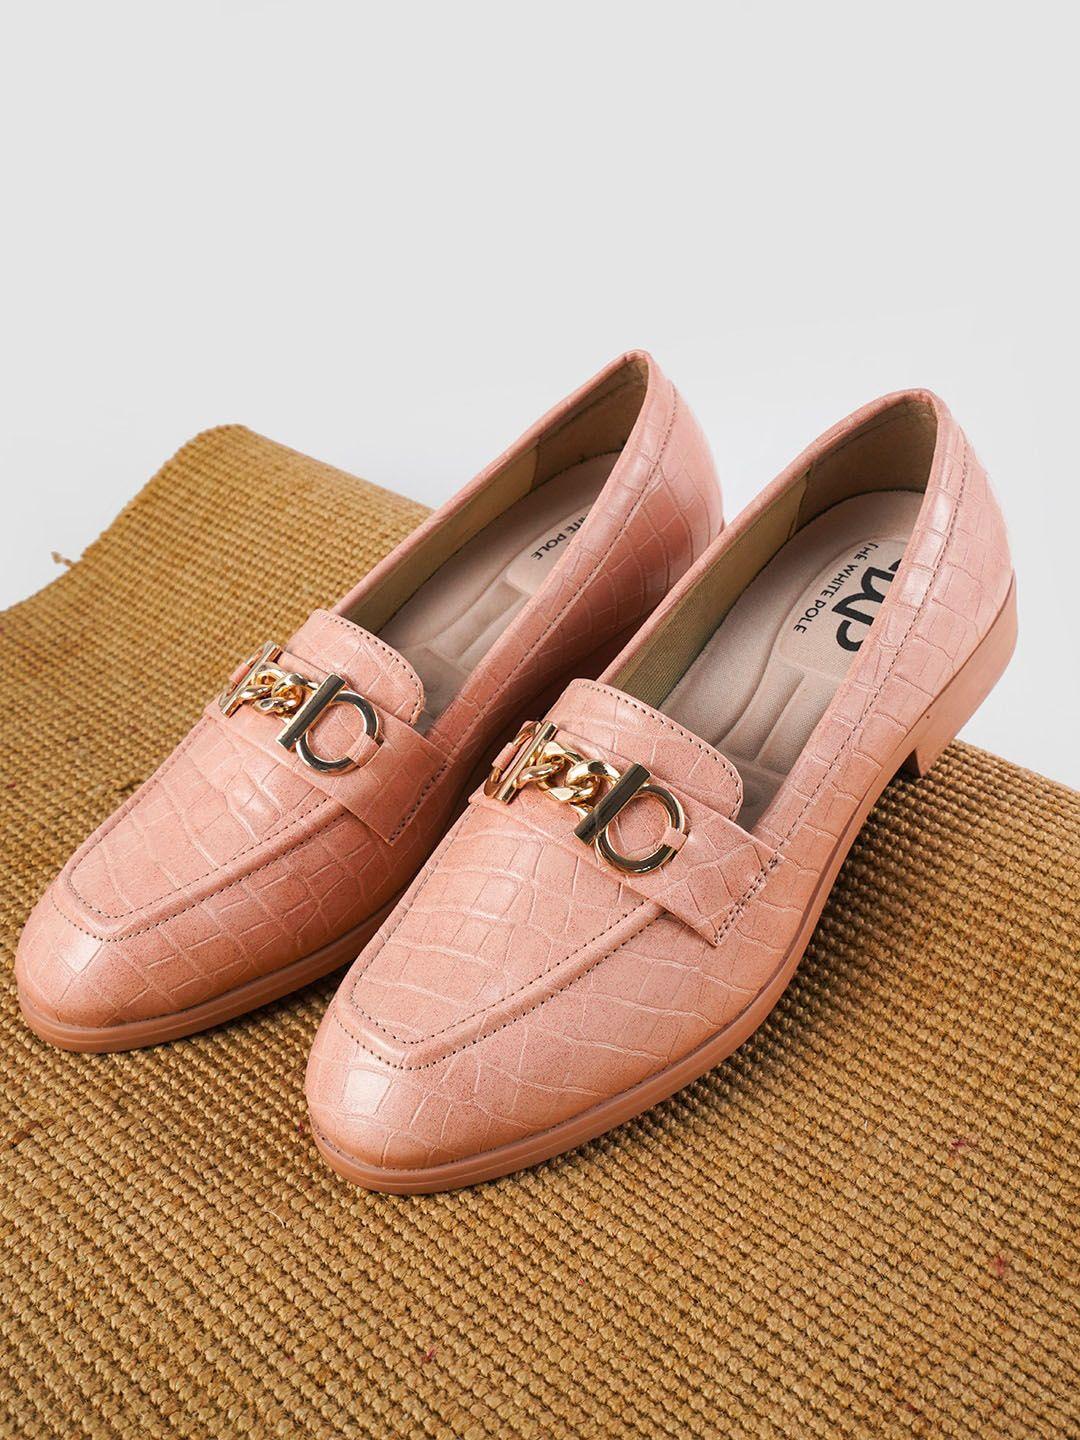 the white pole women textured comfort insole lightweight loafers